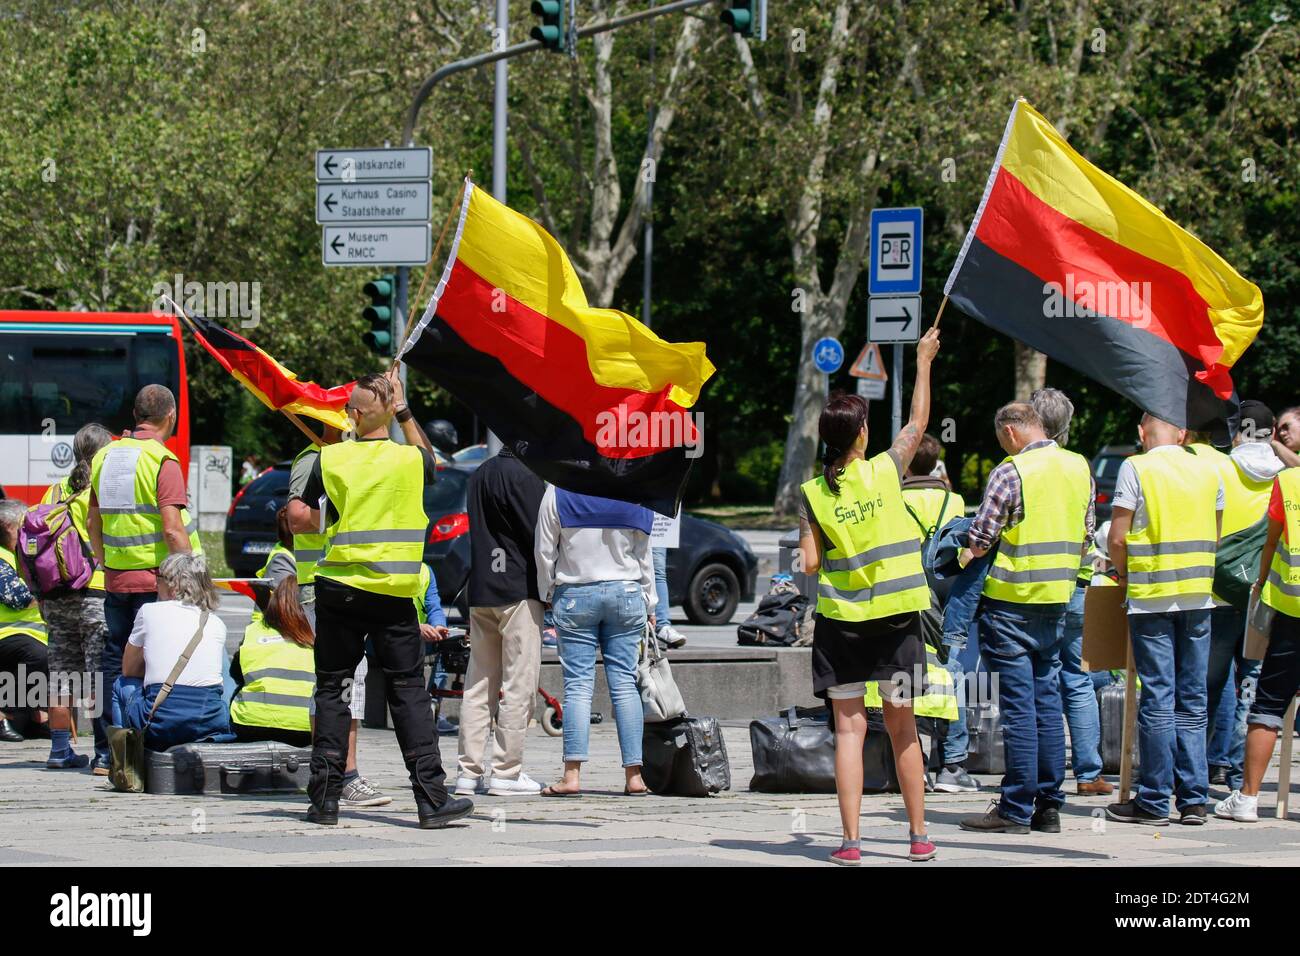 Wiesbaden, Germany. 25th May 2019. Protester wave German flags upside down, a symbol of the Reichsburgerbewegung ("Reich Citizens' Movement"), who reject the modern German state. Under 100 right wing protesters marched with yellow vests through Wiesbaden, to protest against the German government. They were confronted by small but loud counter protest. Stock Photo